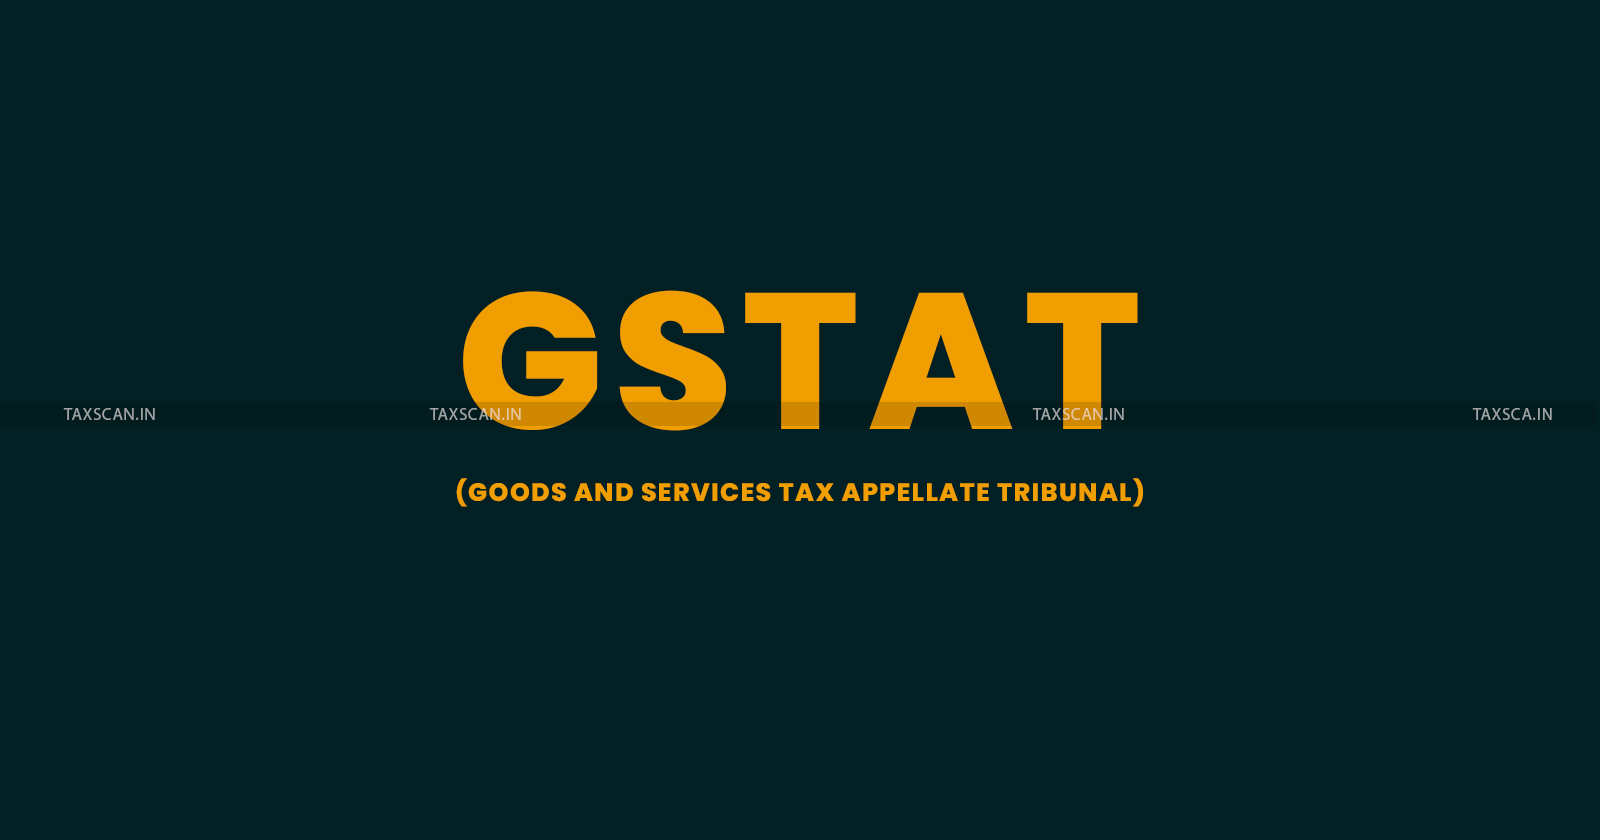 GSTAT - Central Govt - Appointment - Central Govt notifies Rules for Appointment and Conditions of Service - Conditions - Rules for Appointment and Conditions of Service of President and Members - taxscan